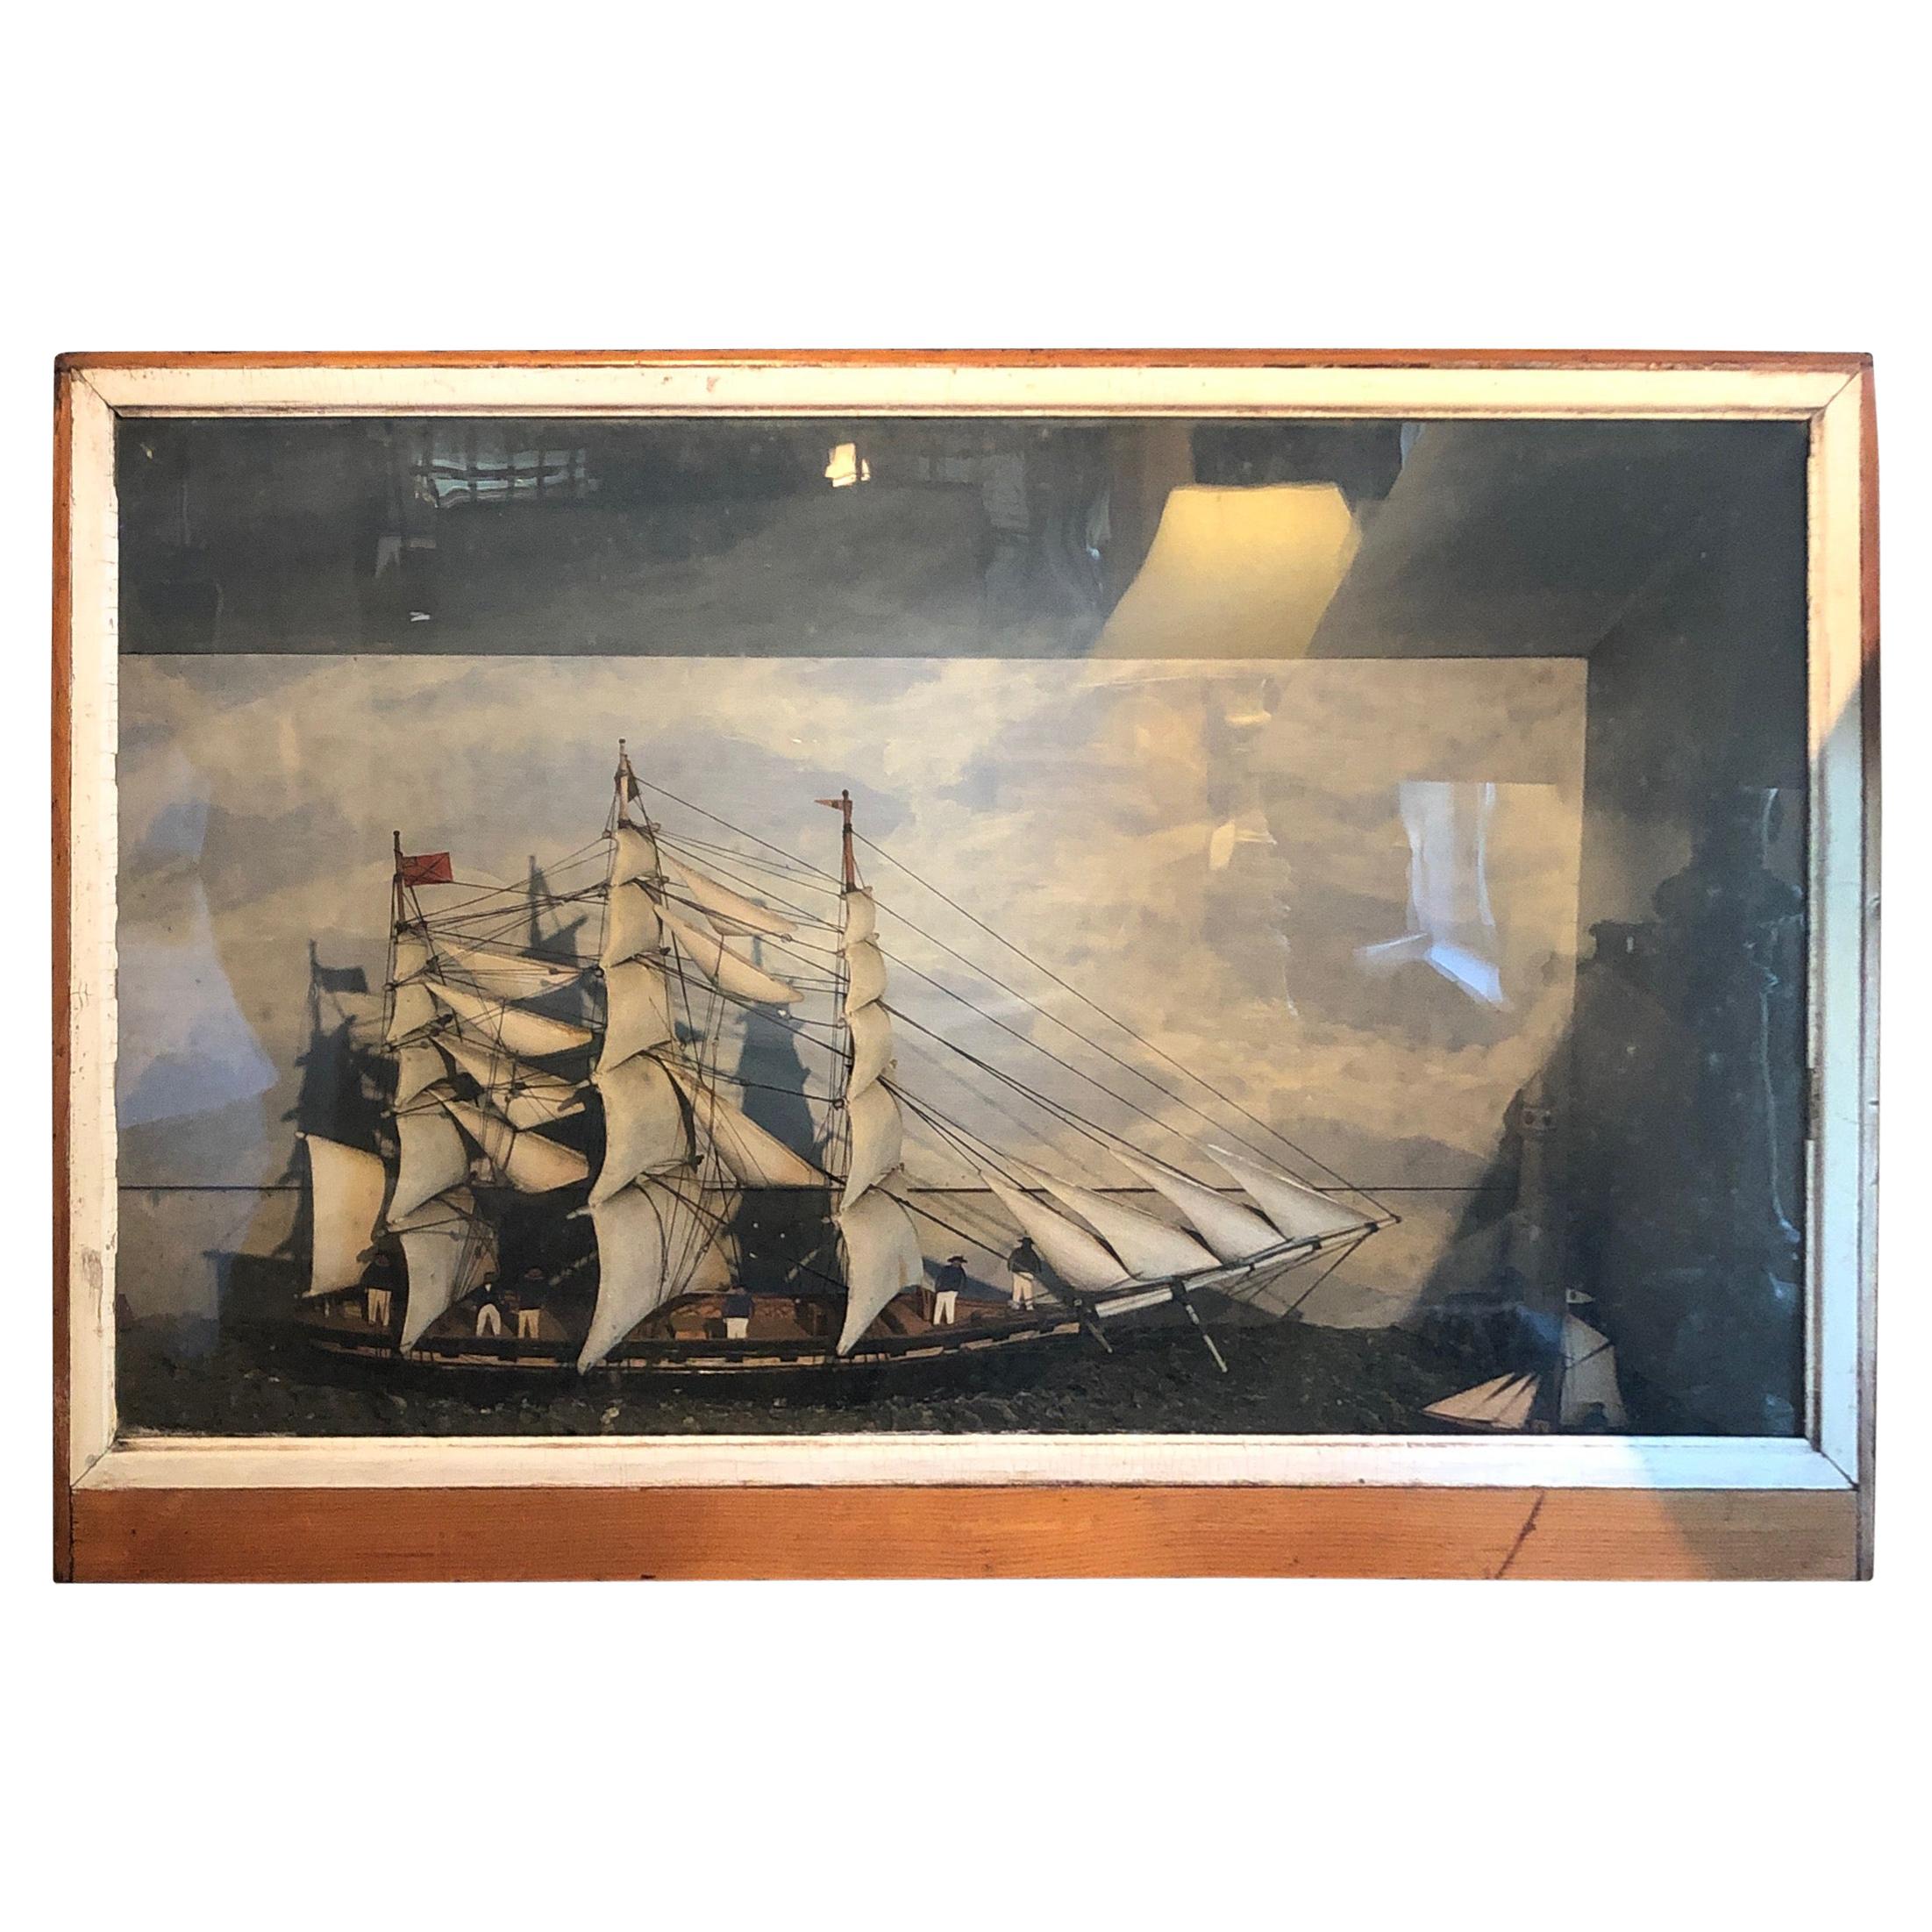 Impressively Large Antique Diorama or Shadow Box of Sailing Vessel